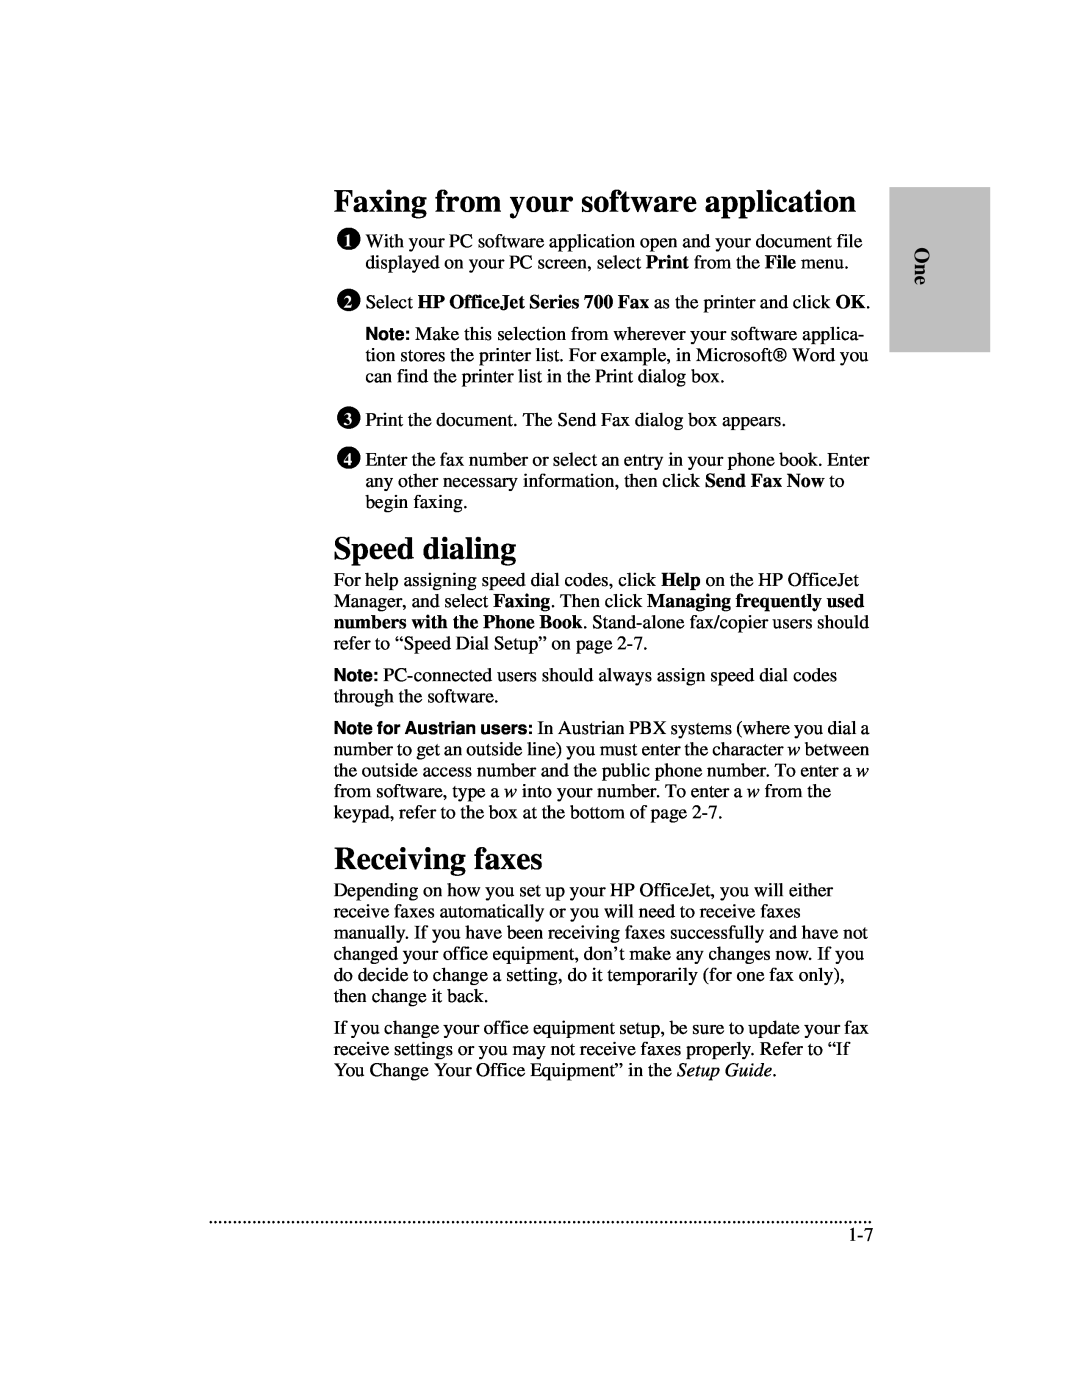 HP 700 manual Faxing from your software application, Speed dialing, Receiving faxes 